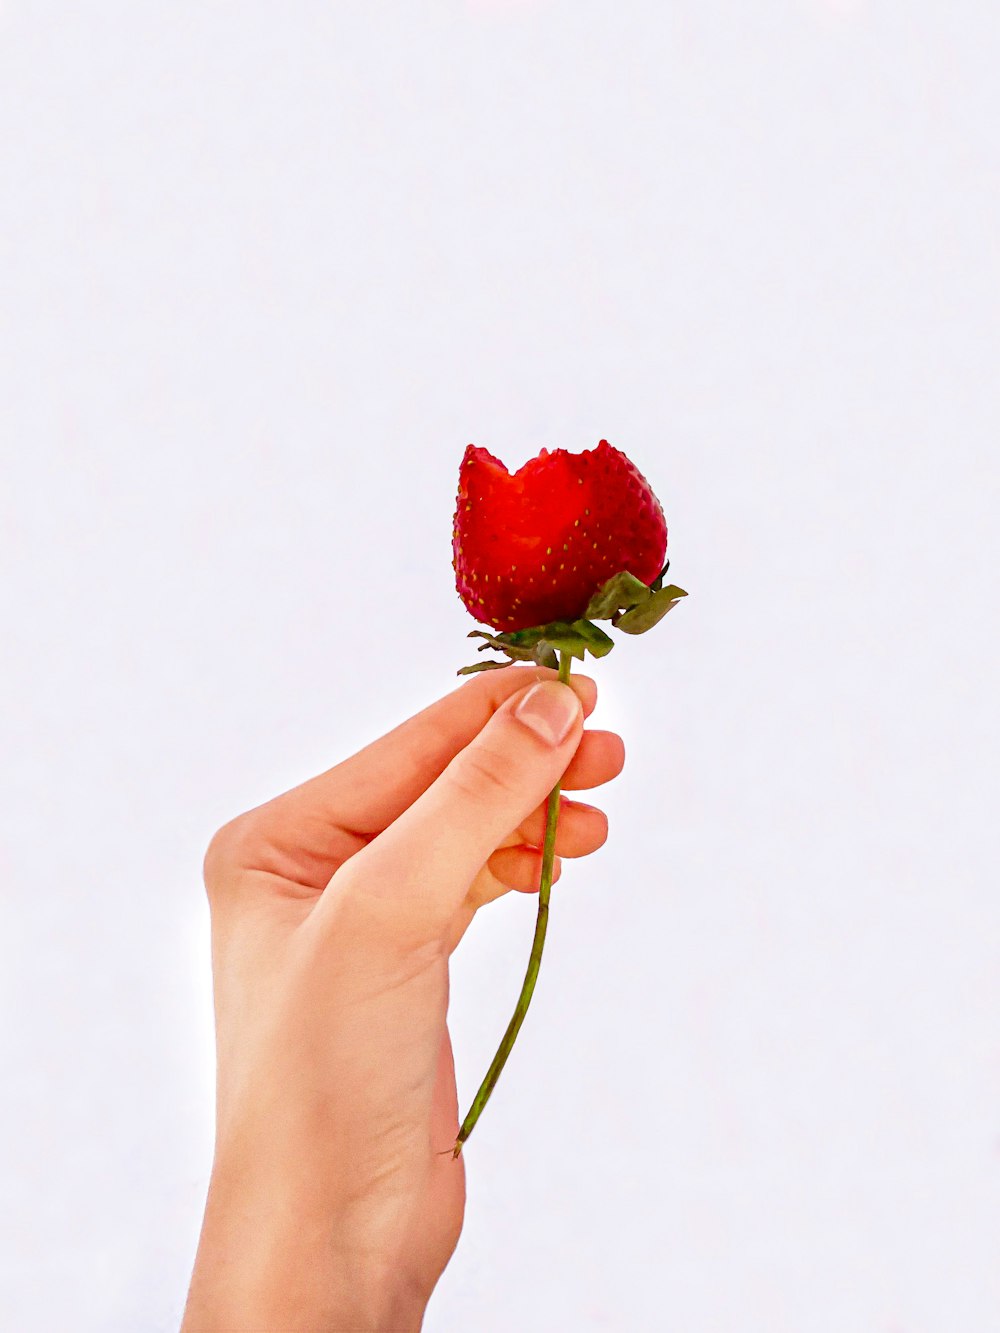 person holding red rose with green leaves